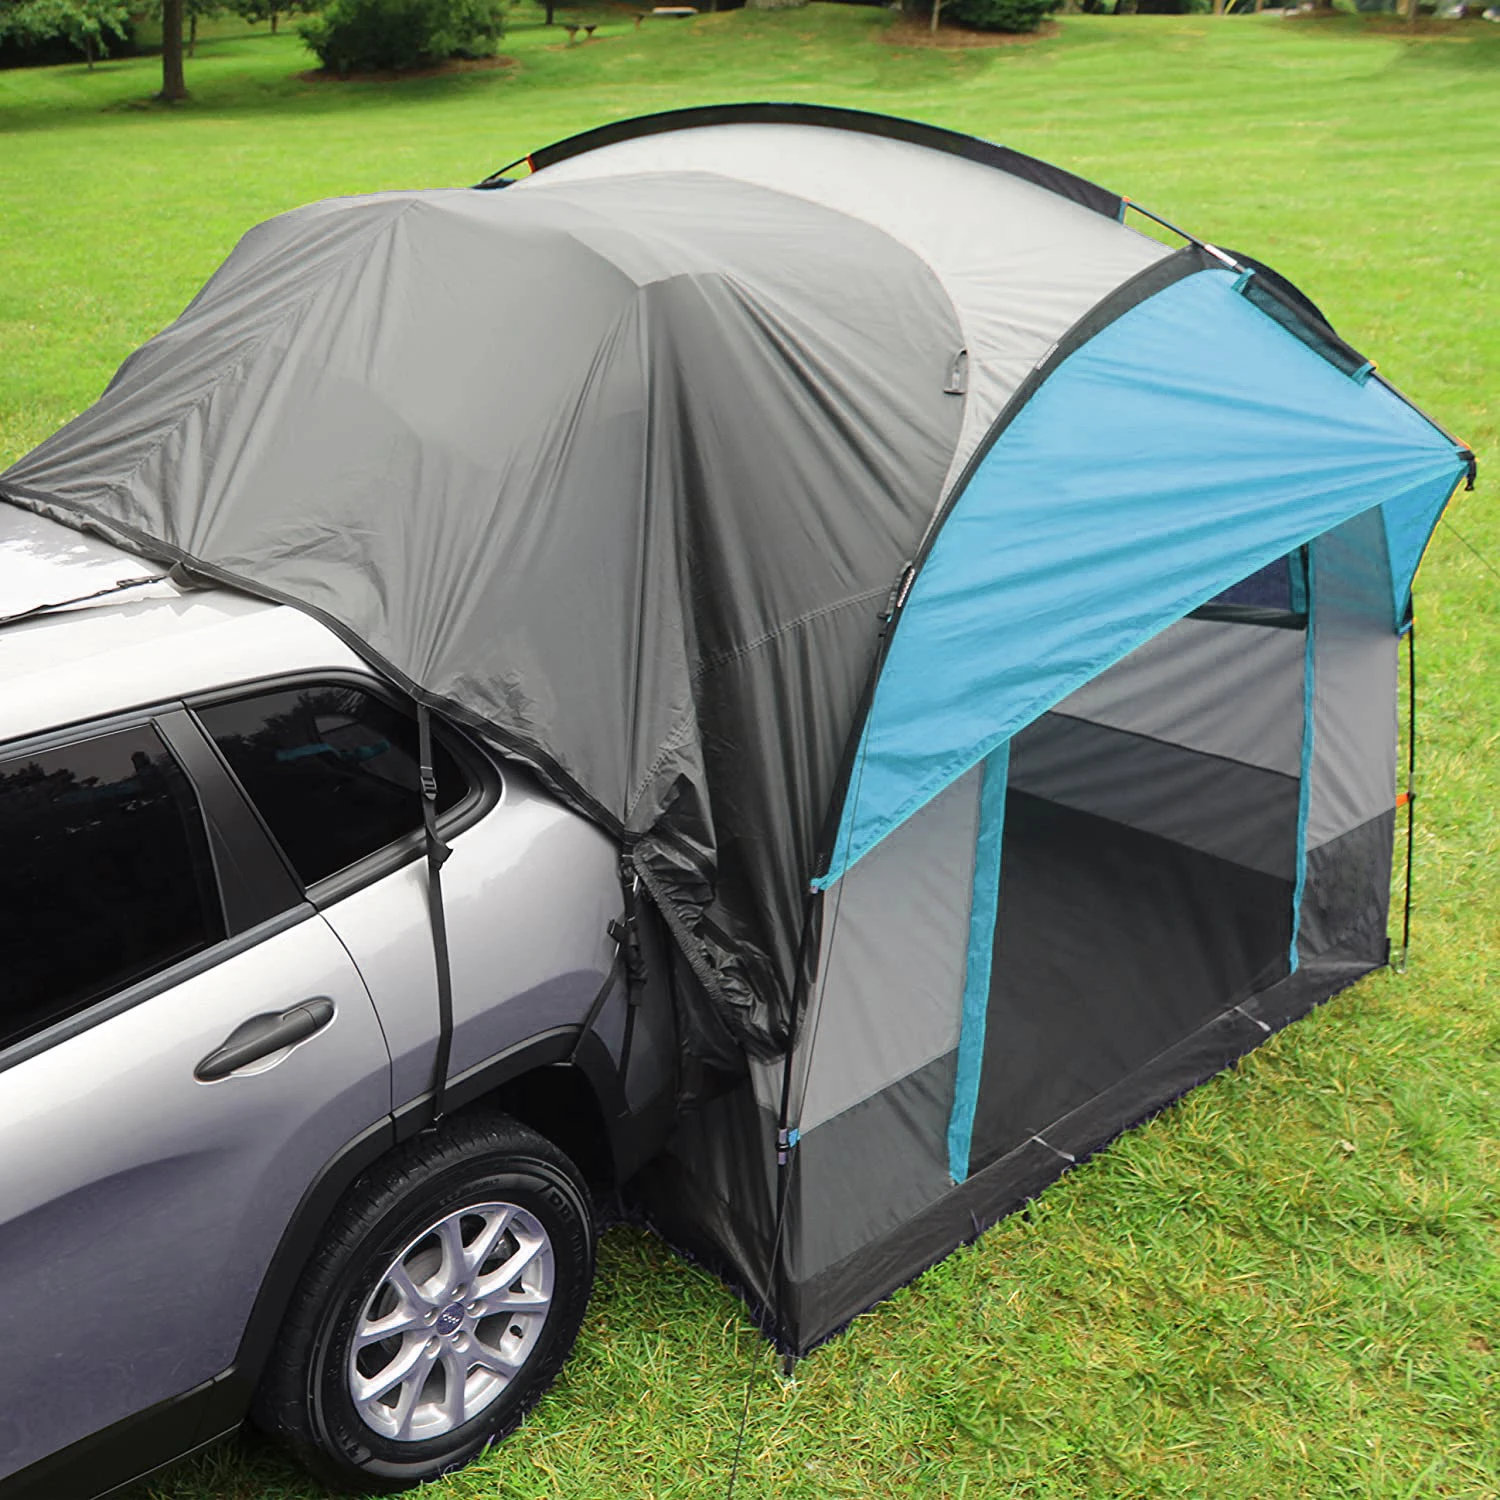 

Mounthood Outdoor Portable Car Rear Tent Car Awning Truck Tent Suv Van Awning Tent For 3-4 Persons